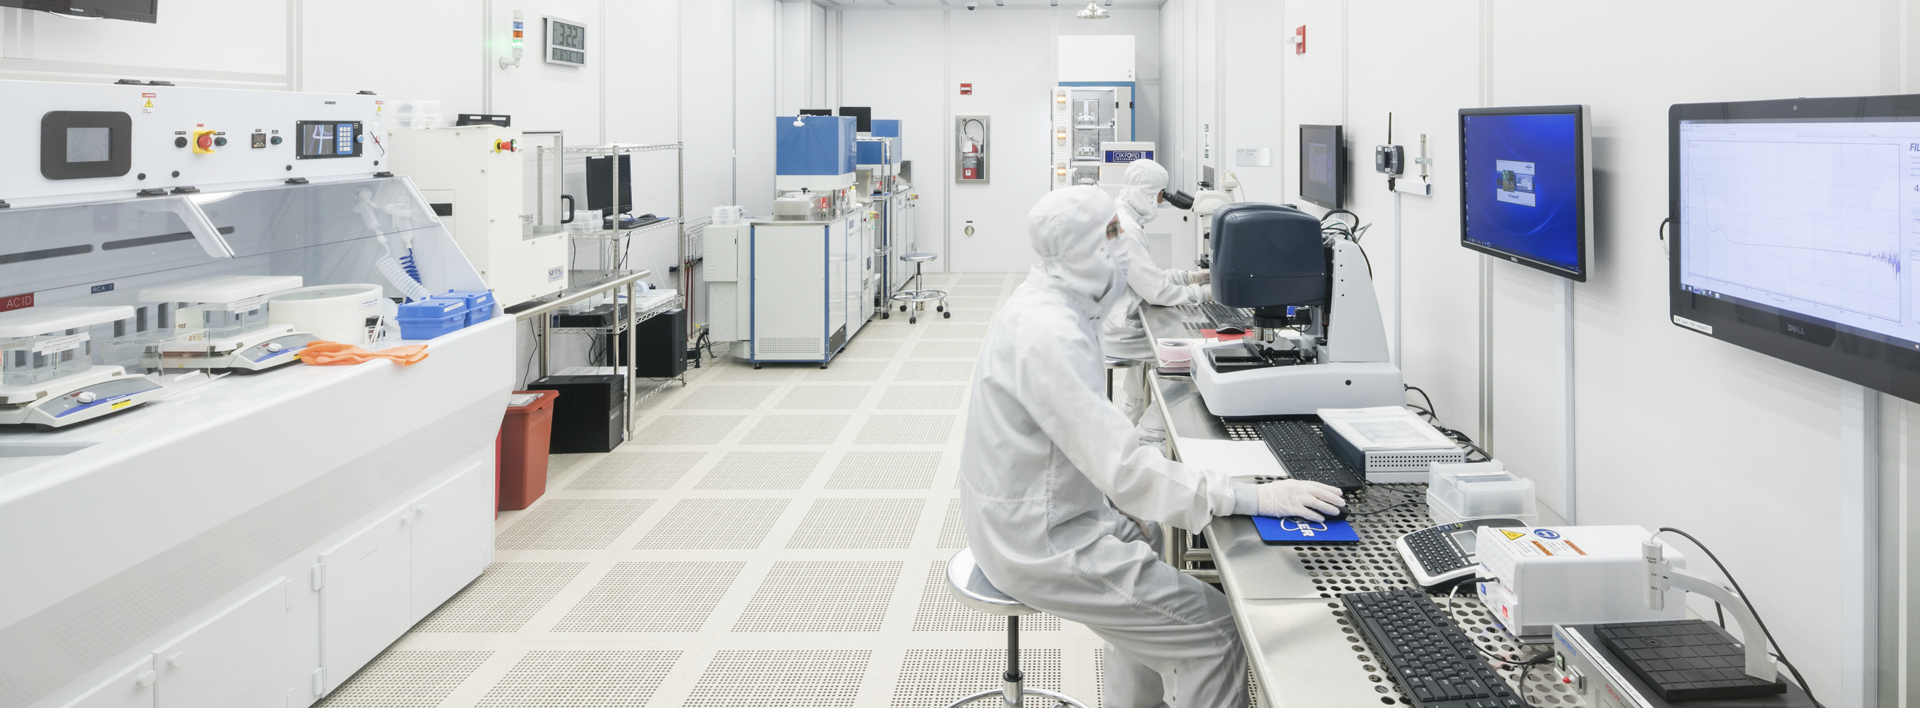 researcher in a nanoscience lab wearing cleanroom gear